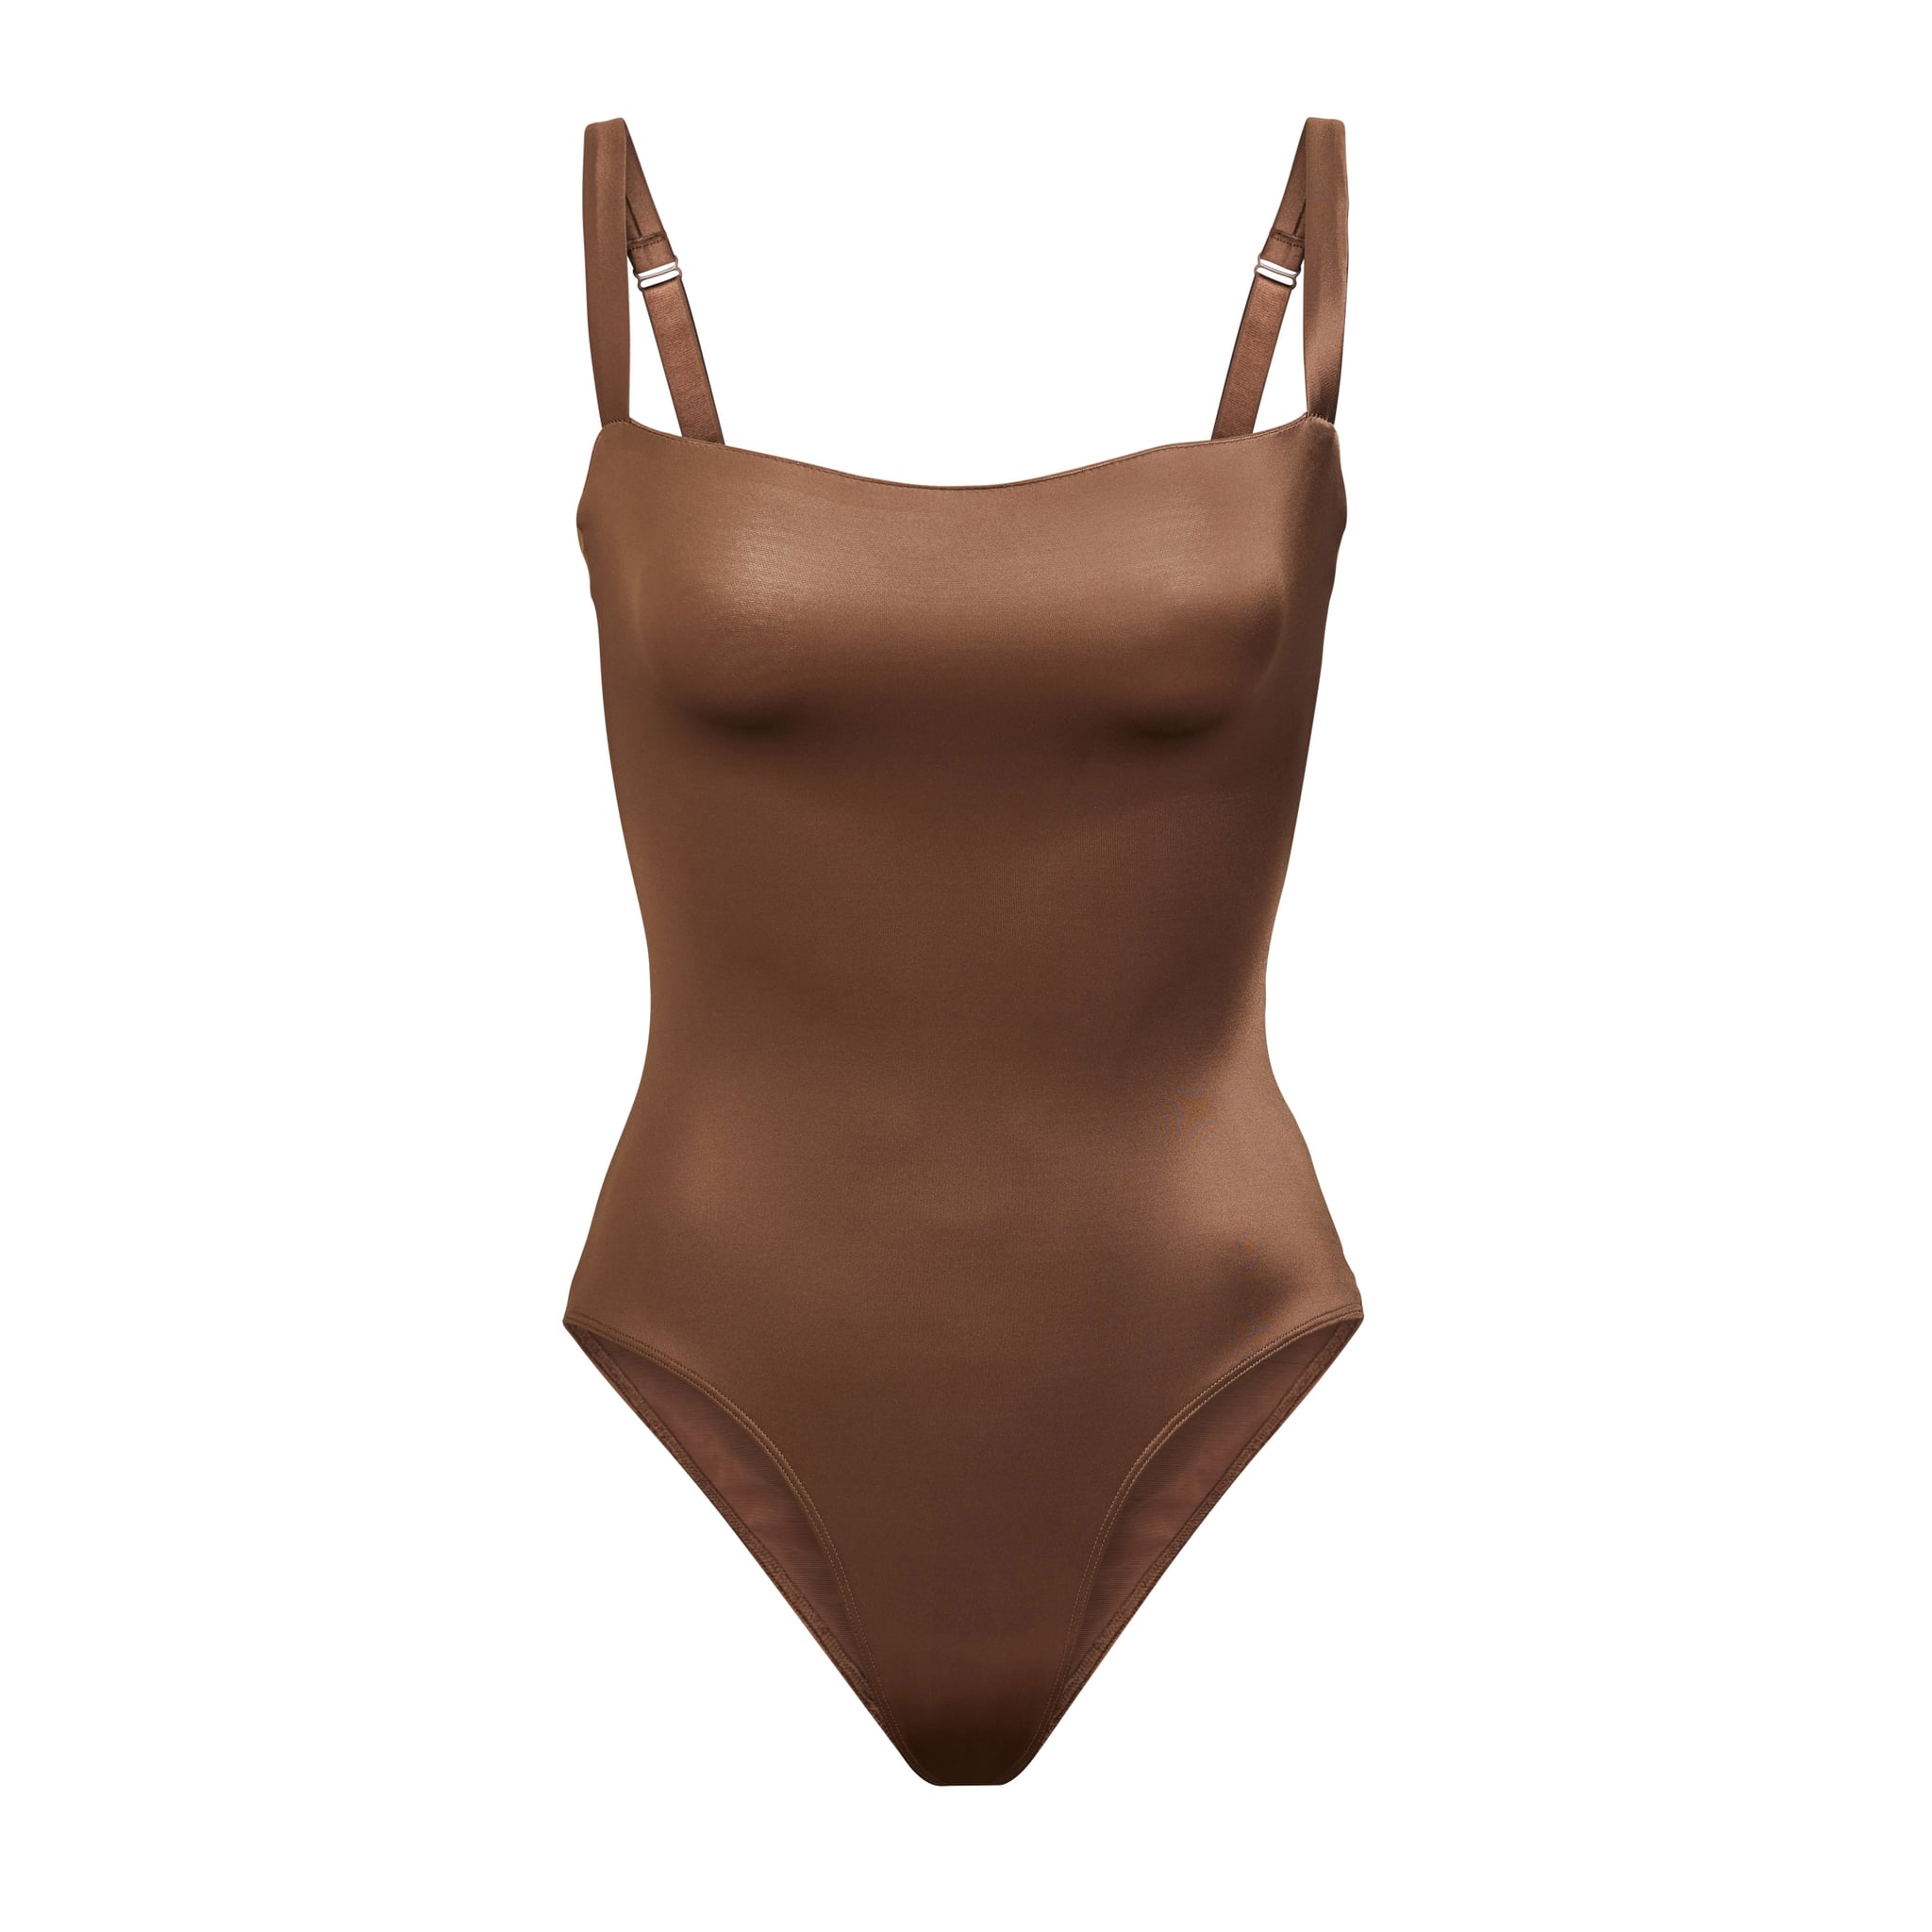 SKIMS Stretch Satin Smoothing Bodysuit in Smokey Quartz, SKIMS Is  Launching a Sexy Stretch Satin Lingerie Line Just in Time For Valentine's  Day